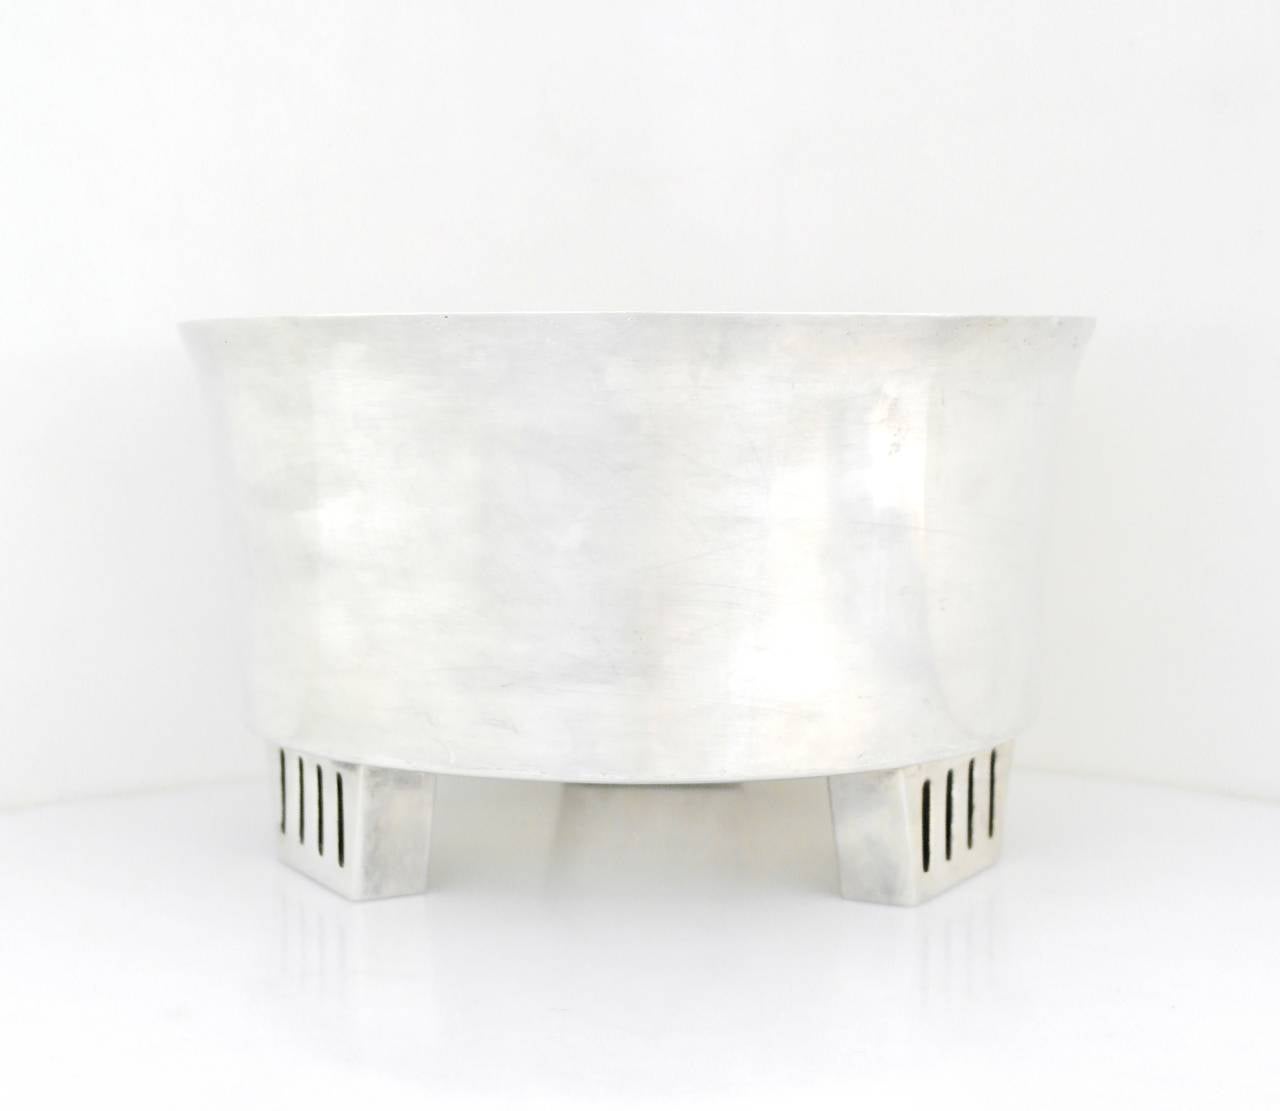 Being offered is a sterling silver bowl made in Mexico. Large centerpiece of modernist form resting on three trapezoid shaped feet with a pierced design as the primary decorative element. Very heavy object weighing 60 oz. Dimensions: a monumental 10